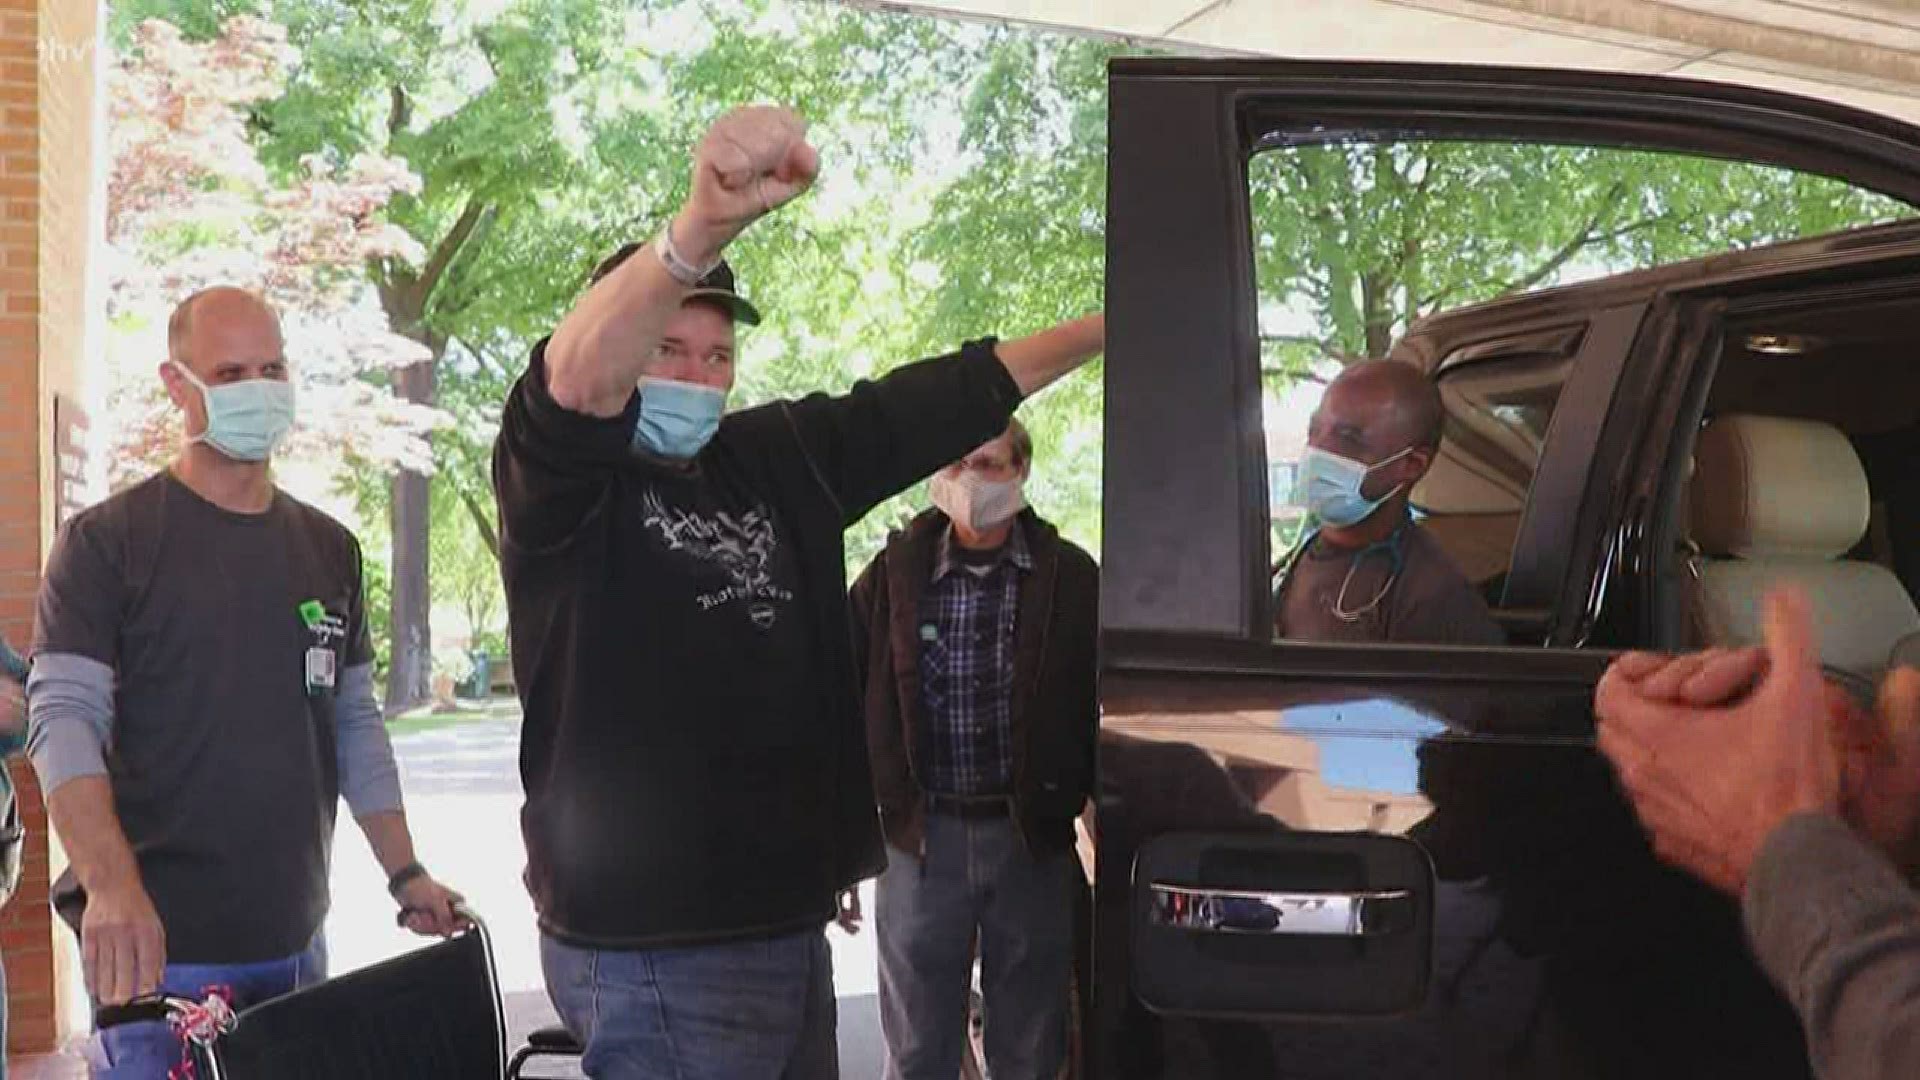 On Saturday, a Vietnam Veteran packed his bags and headed home after his long battle with COVID-19. There were several people waiting for him on the outside.